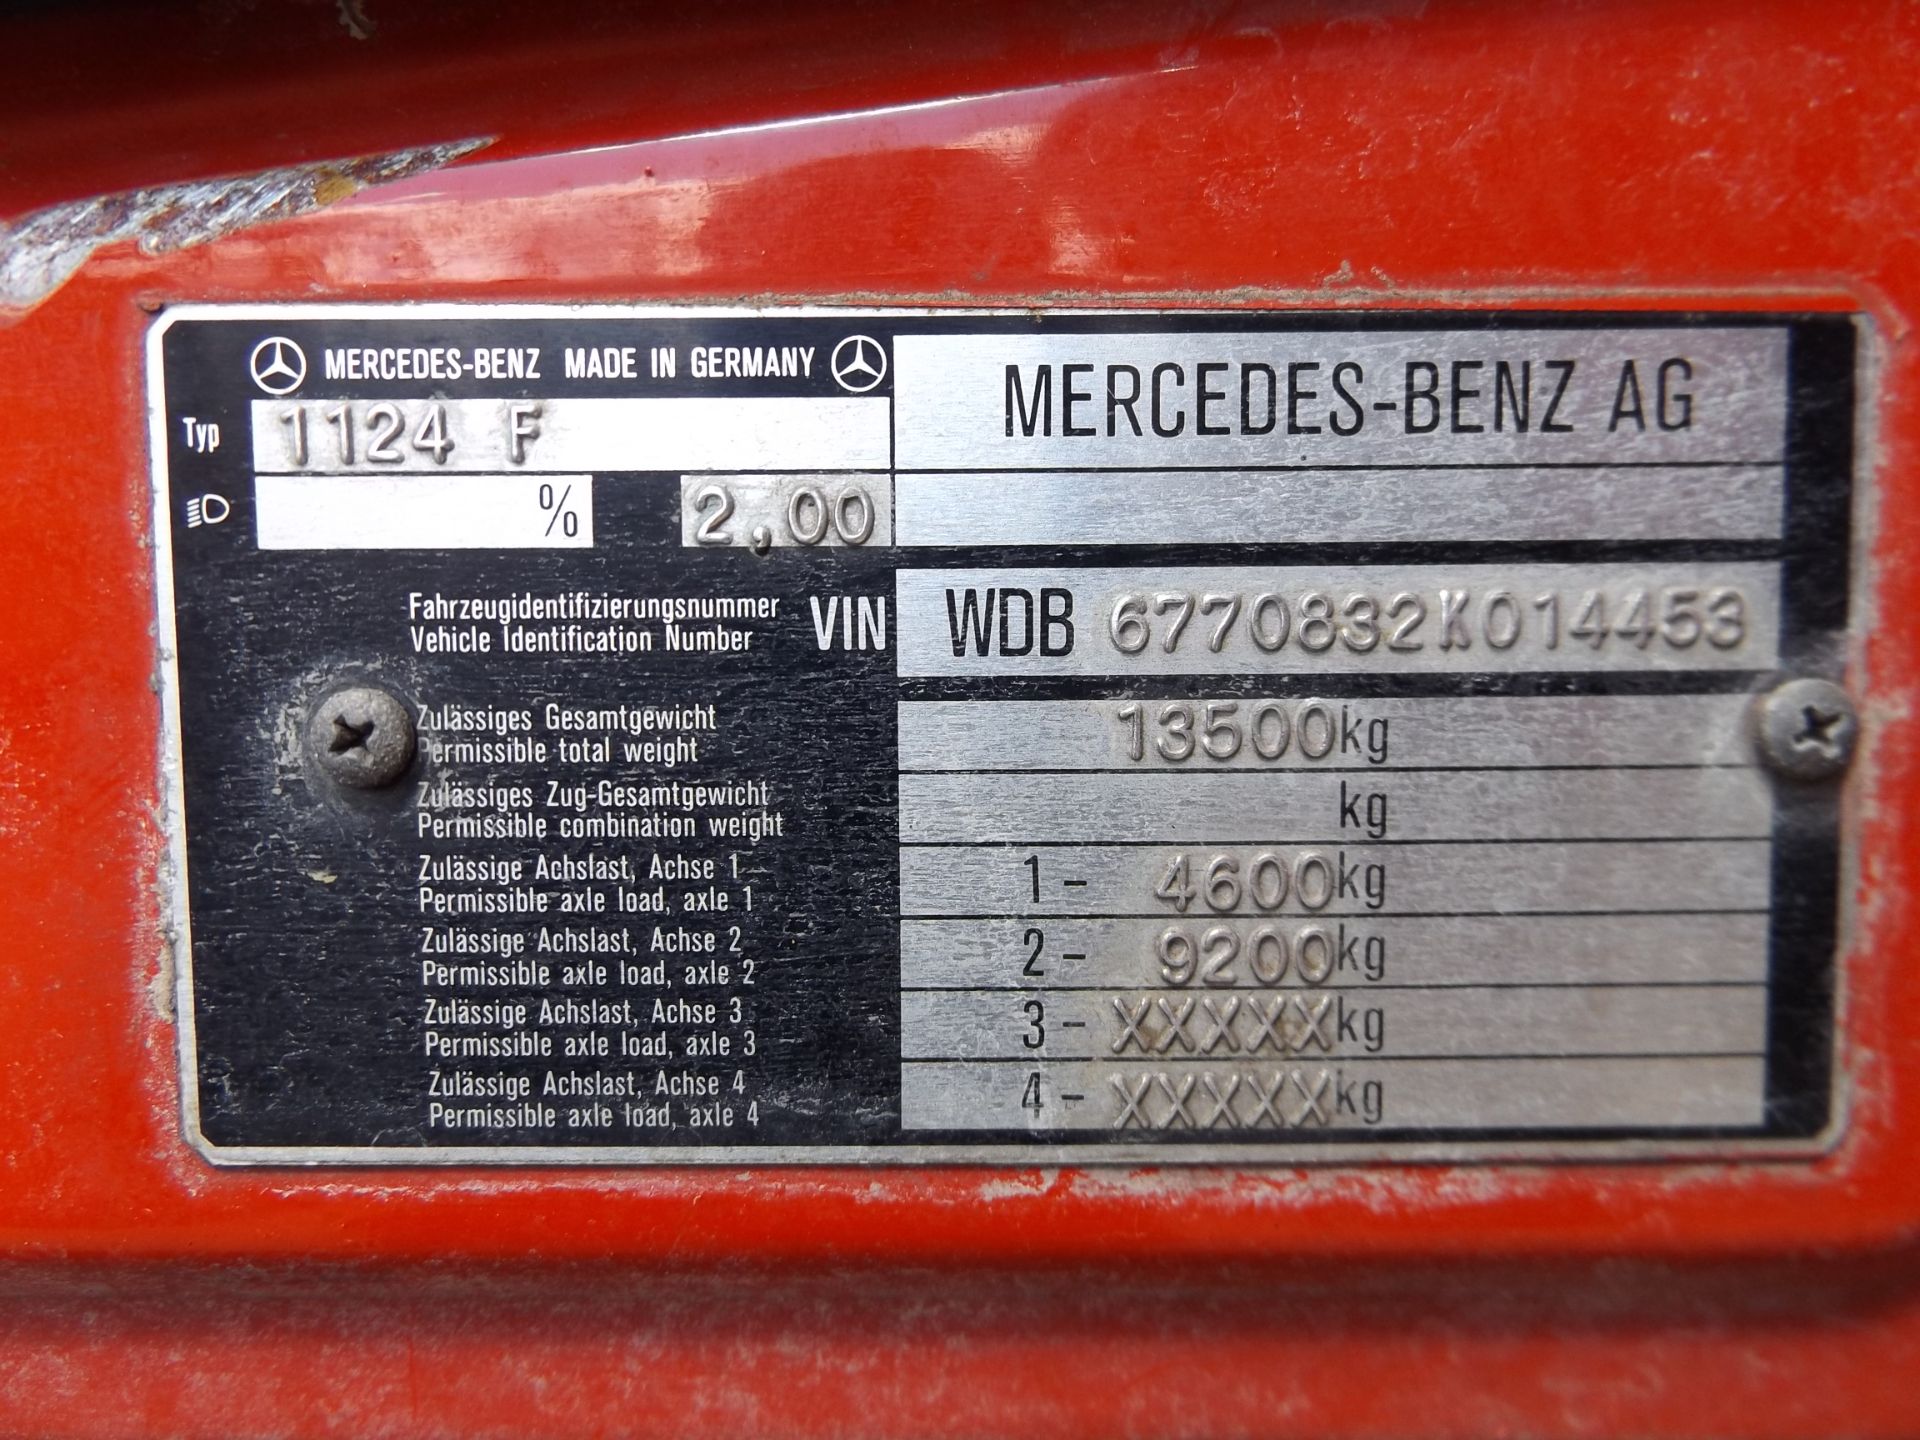 Mercedes 1124 Fire Engine - Image 16 of 16